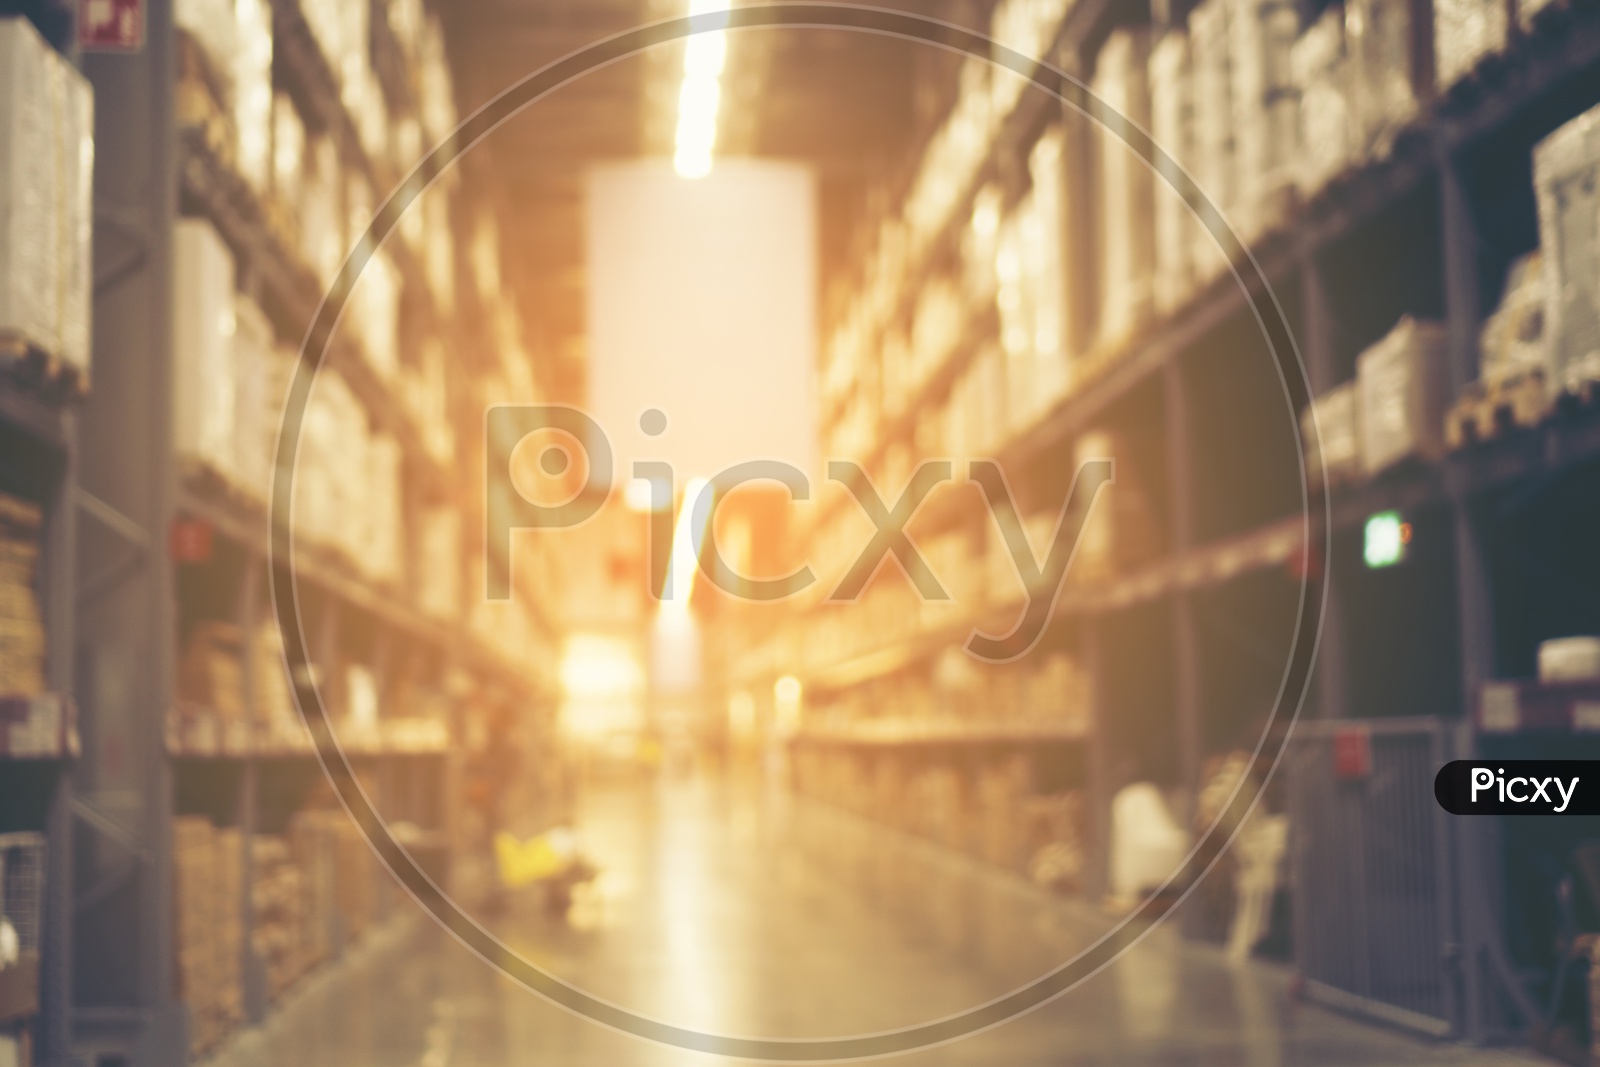 Blurred image of shelf in modern distribution warehouse or storehouse. Defocused background of industrial warehouse interior aisle